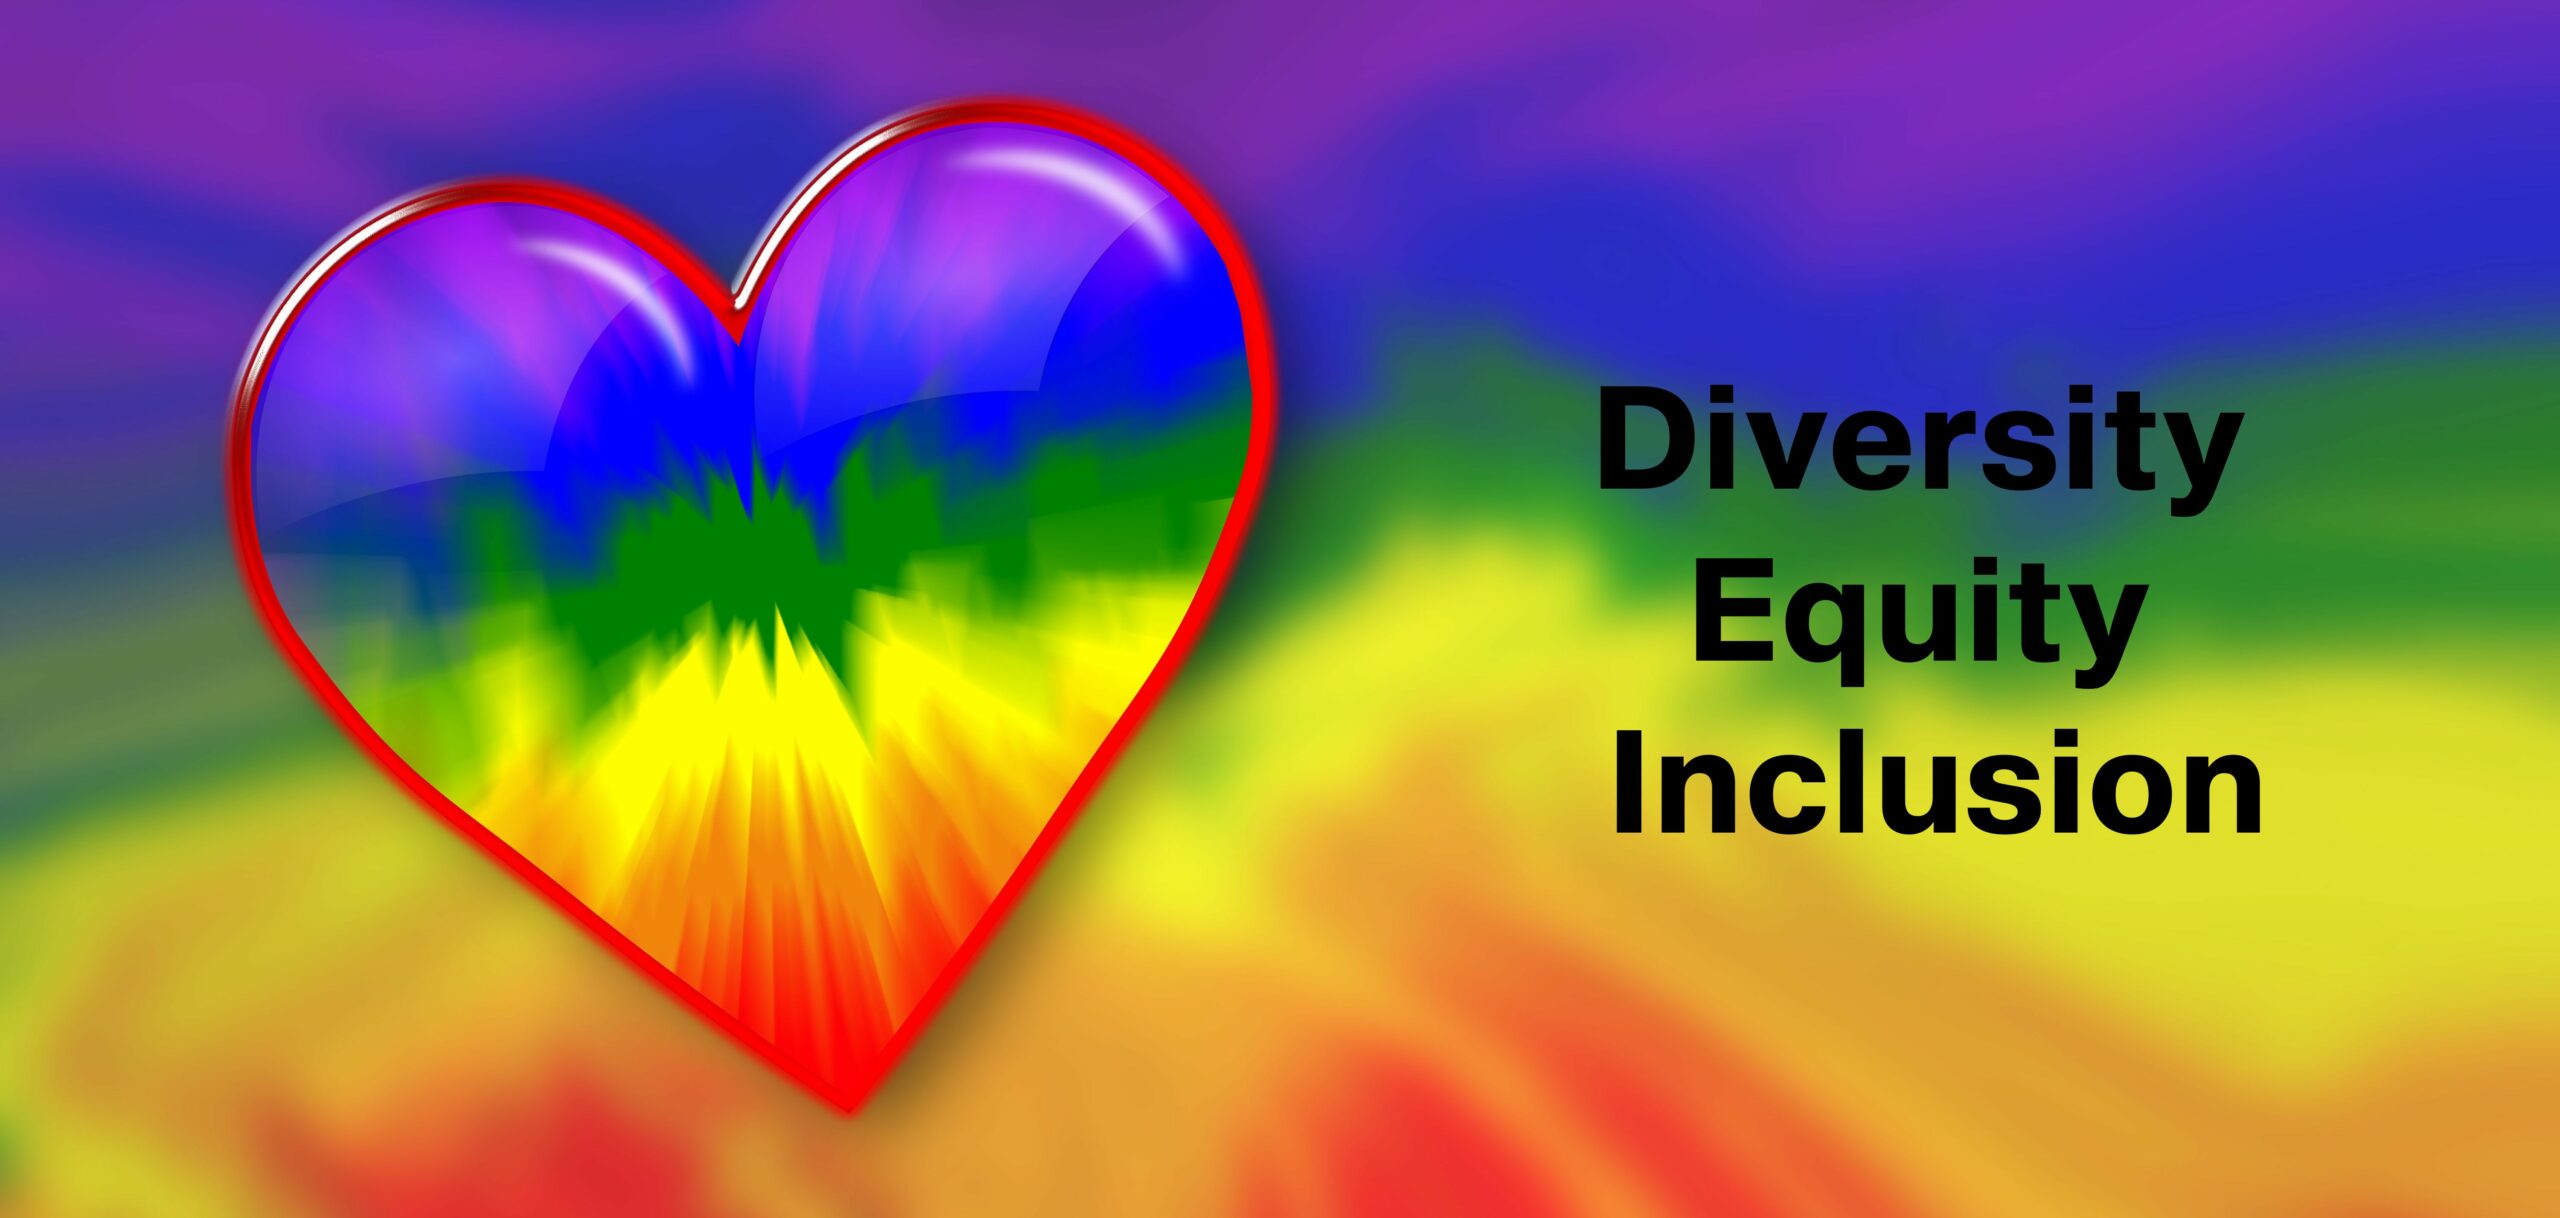 Diversity Equity and Inclusion (DEI) words with rainbow colors